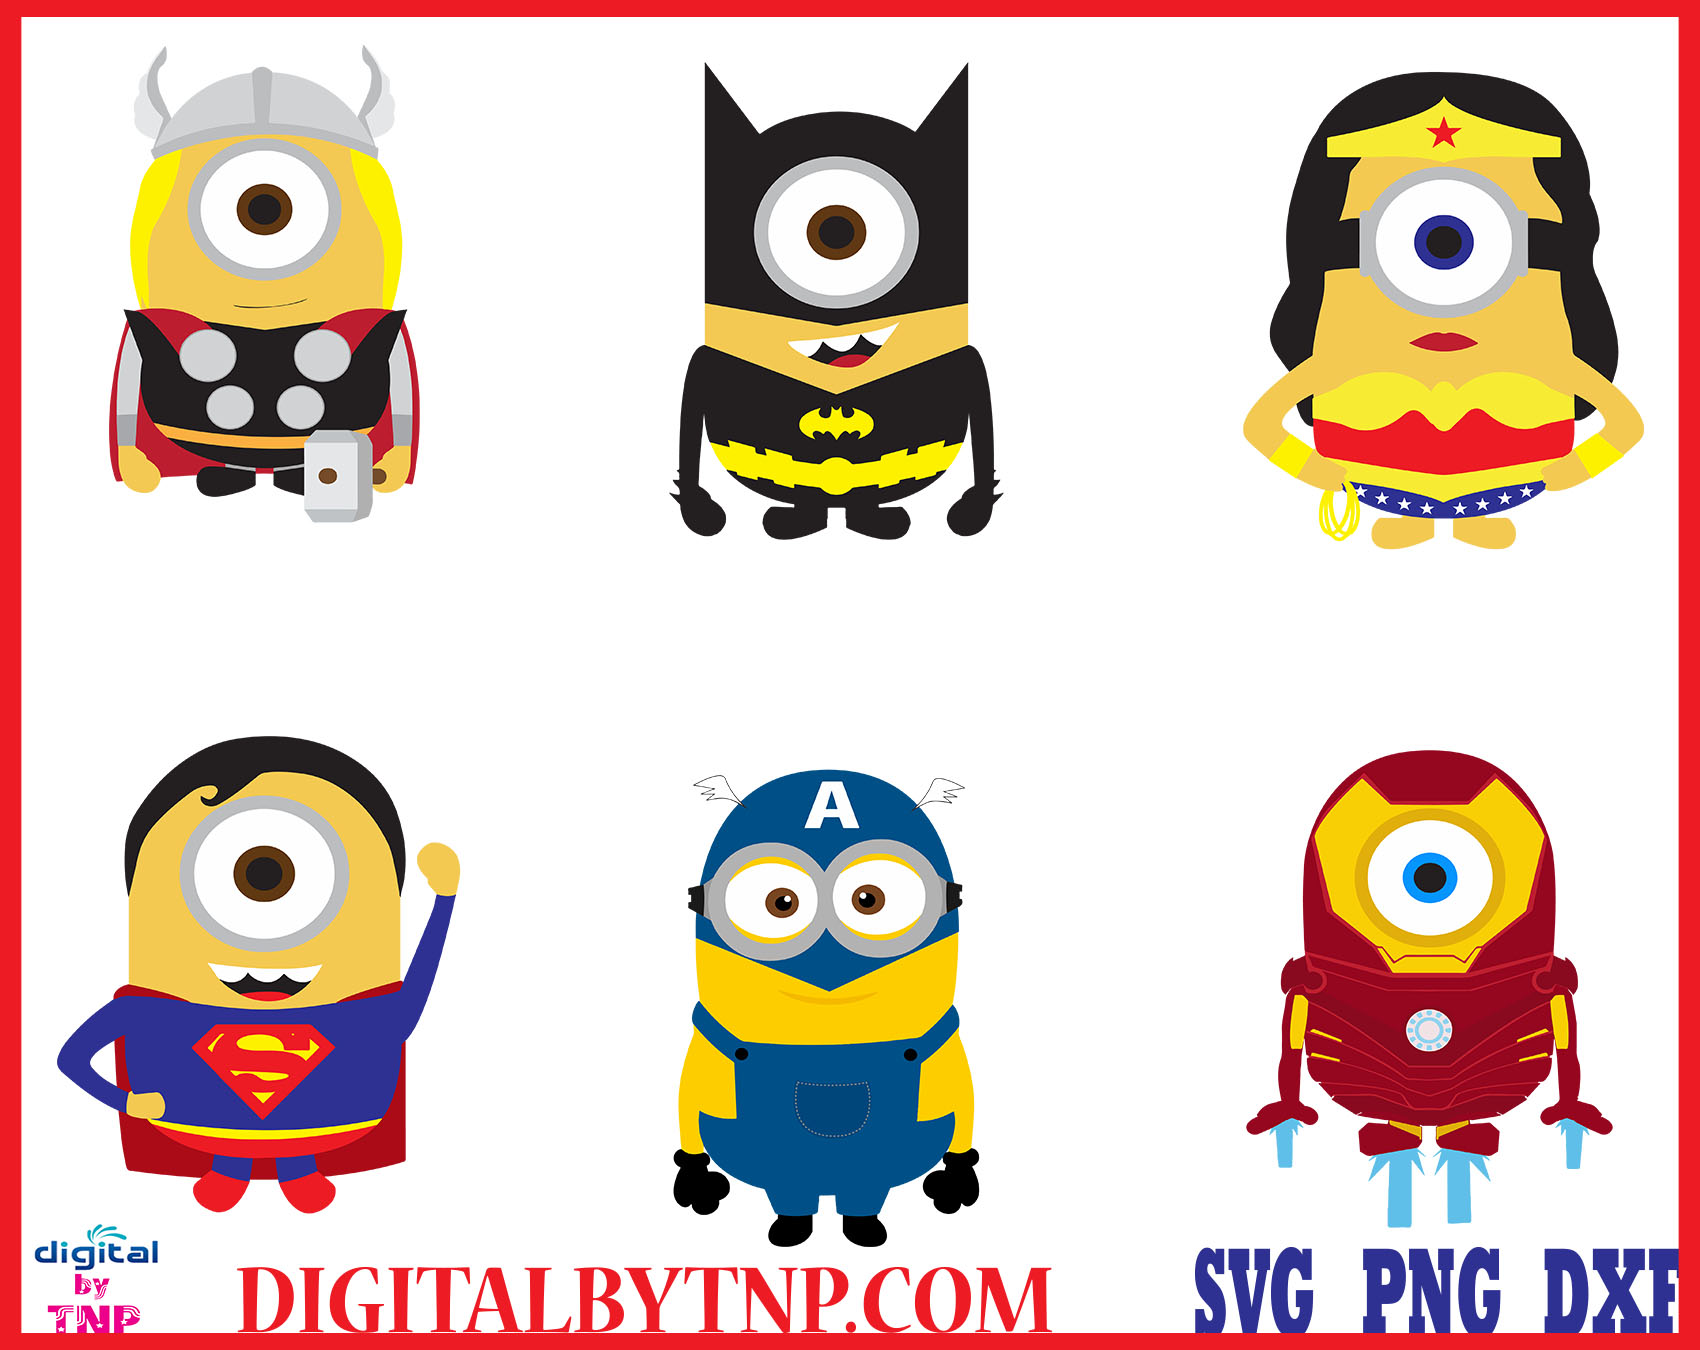 Download Minions Sgv Minion Svg Despicable Me Svg Minion Party Minions Birthday Minions Silhouette Monion Silhouette Banana Svg Minion Print Customer Satisfaction Is Our Priority